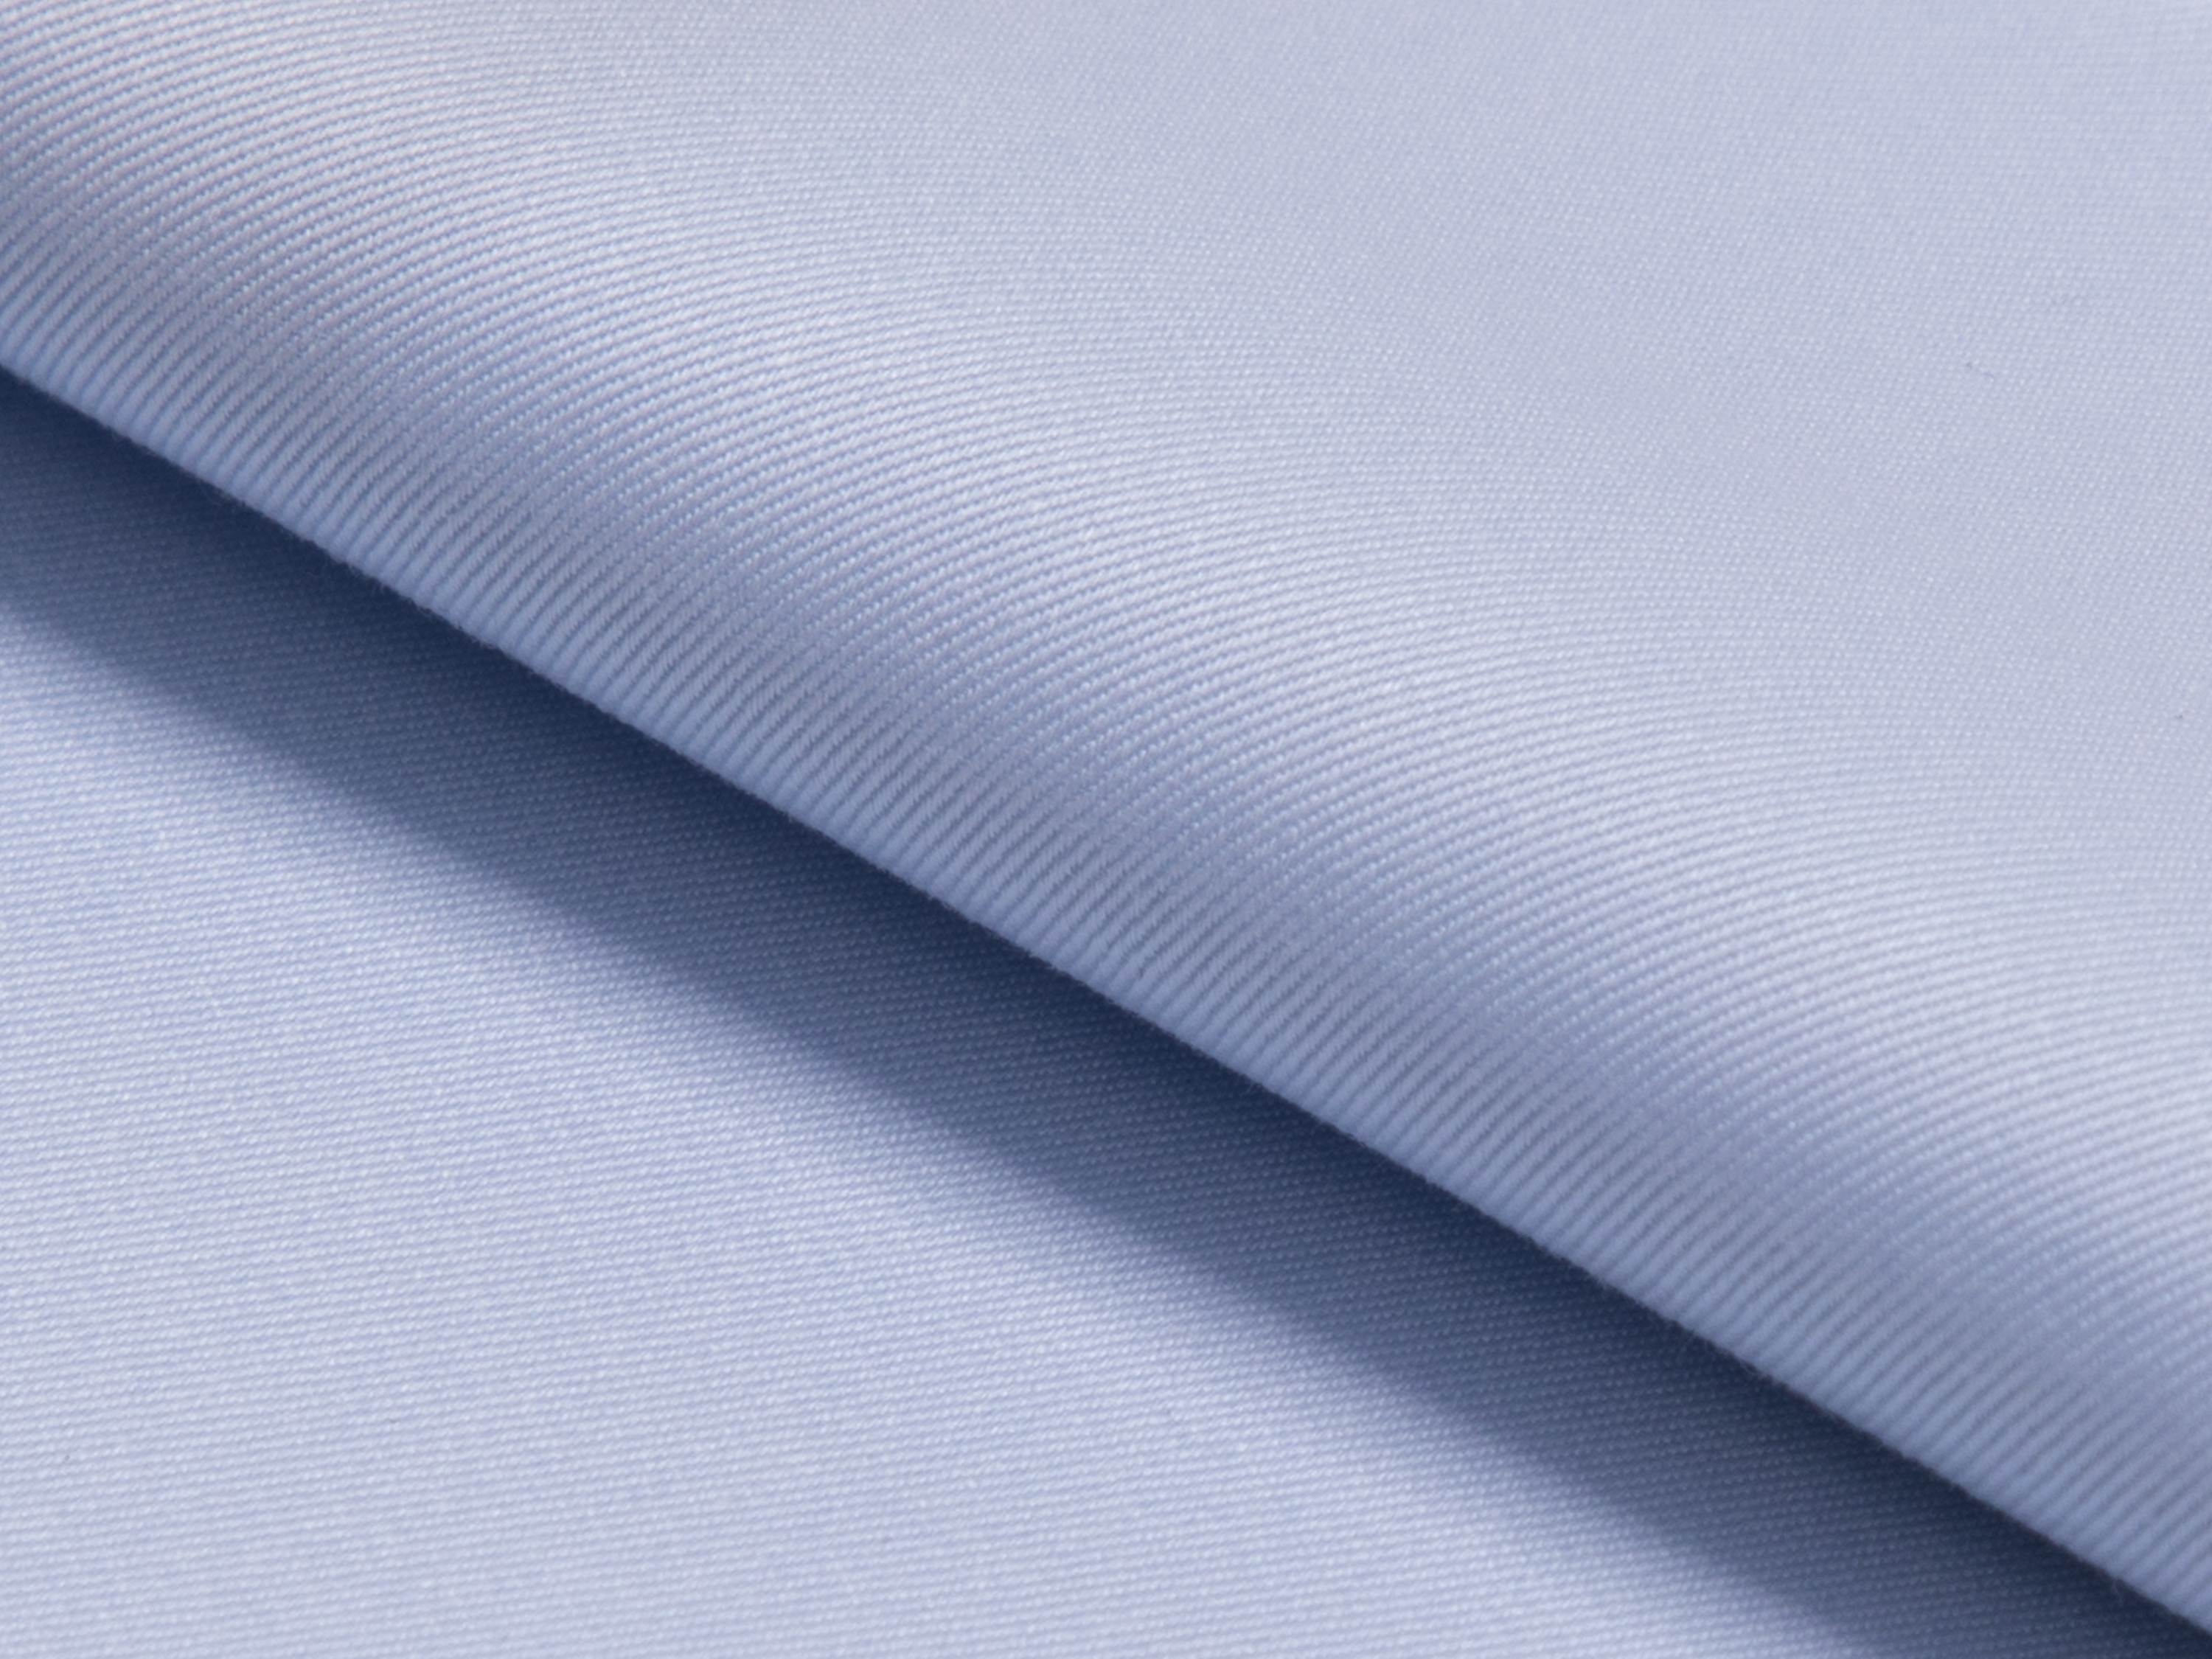 Buy tailor made shirts online -  - Twill Light Blue